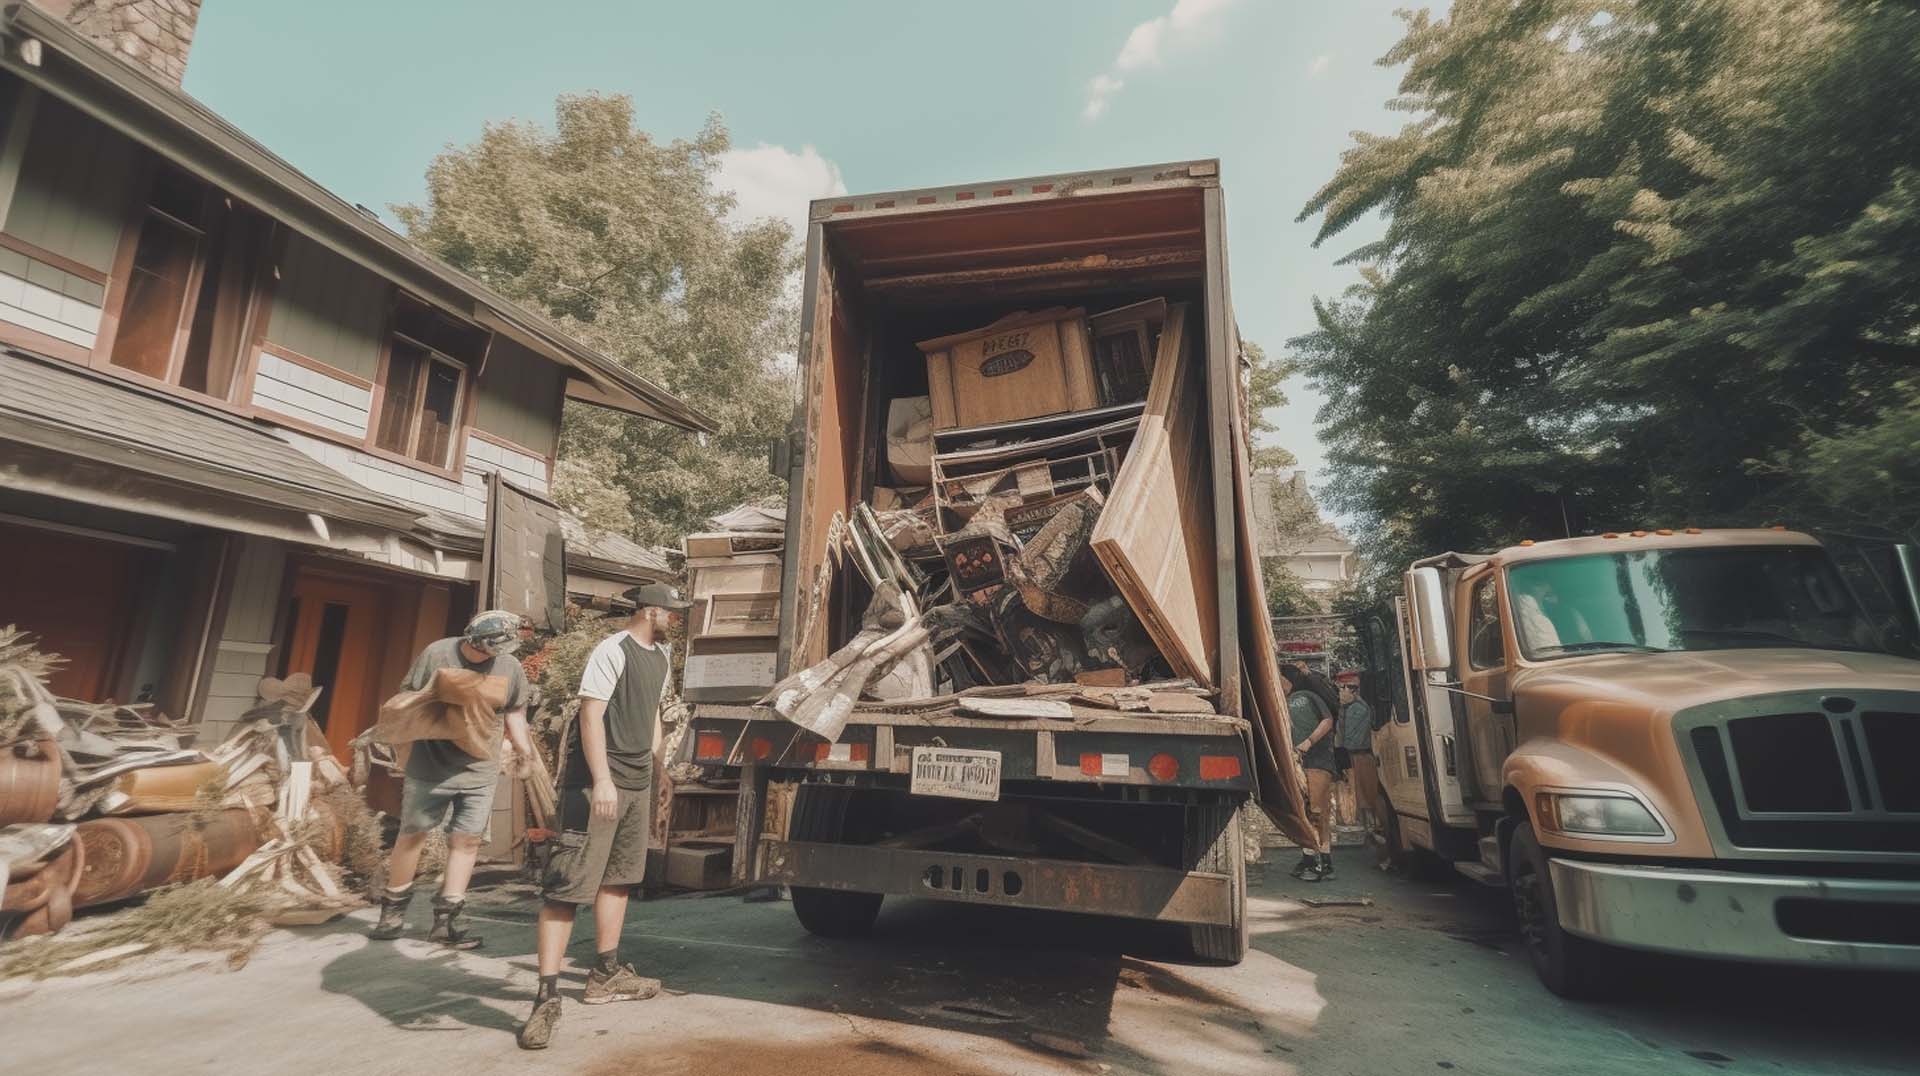 How to Find a Reputable Junk Removal Company in Pierrefonds, Quebec